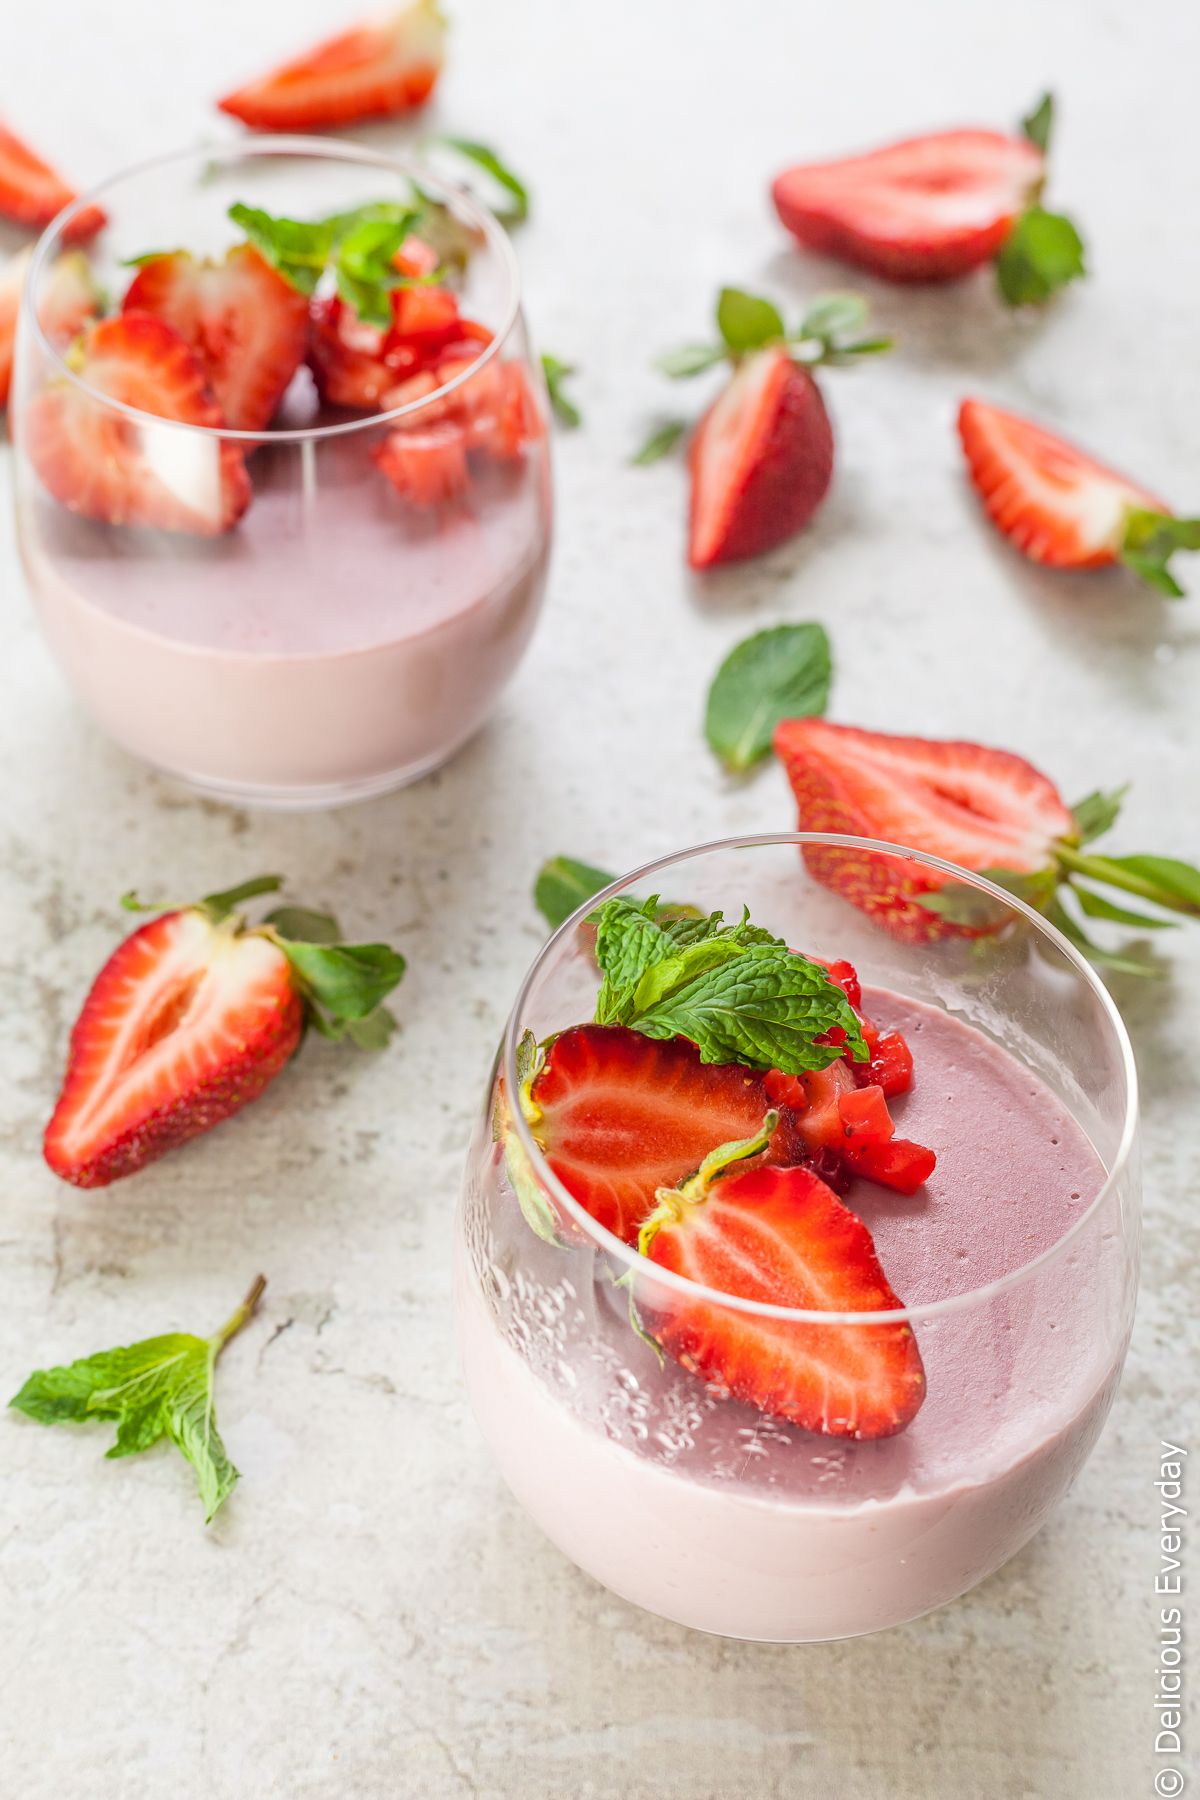 This delicious strawberry vegan panna cotta is quick and easy to make. If you love panna cotta but no longer eat dairy you'll love this easy recipe. 